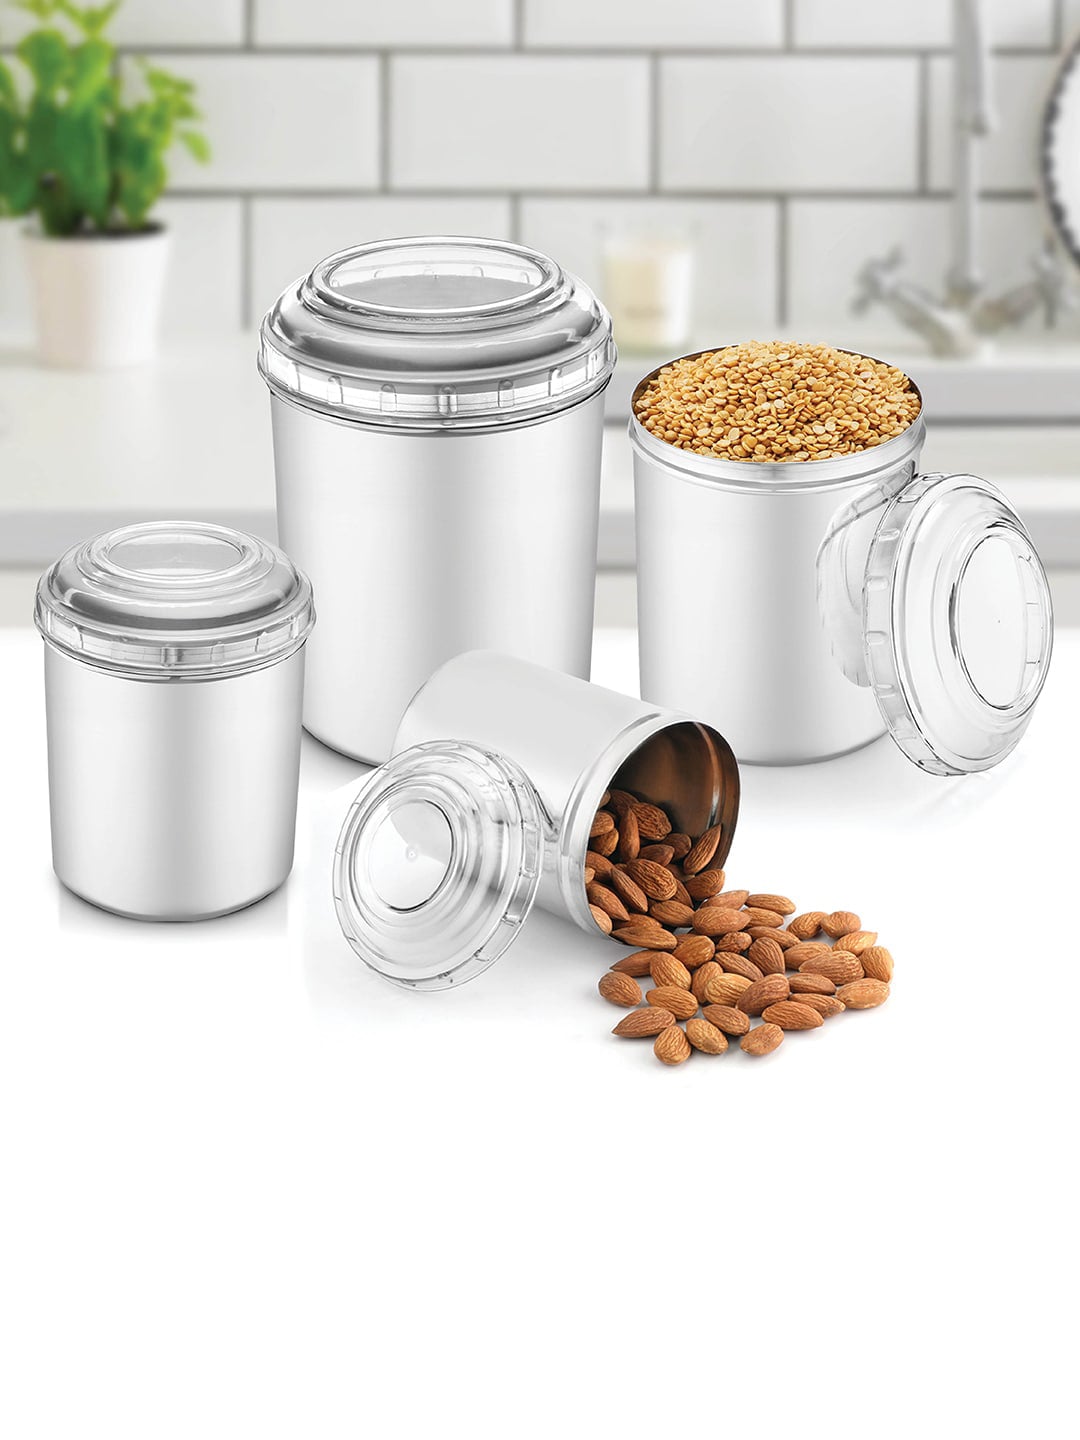 Jensons Set Of 16 Transparent & Silver-Toned Stainless Steel Canisters Price in India